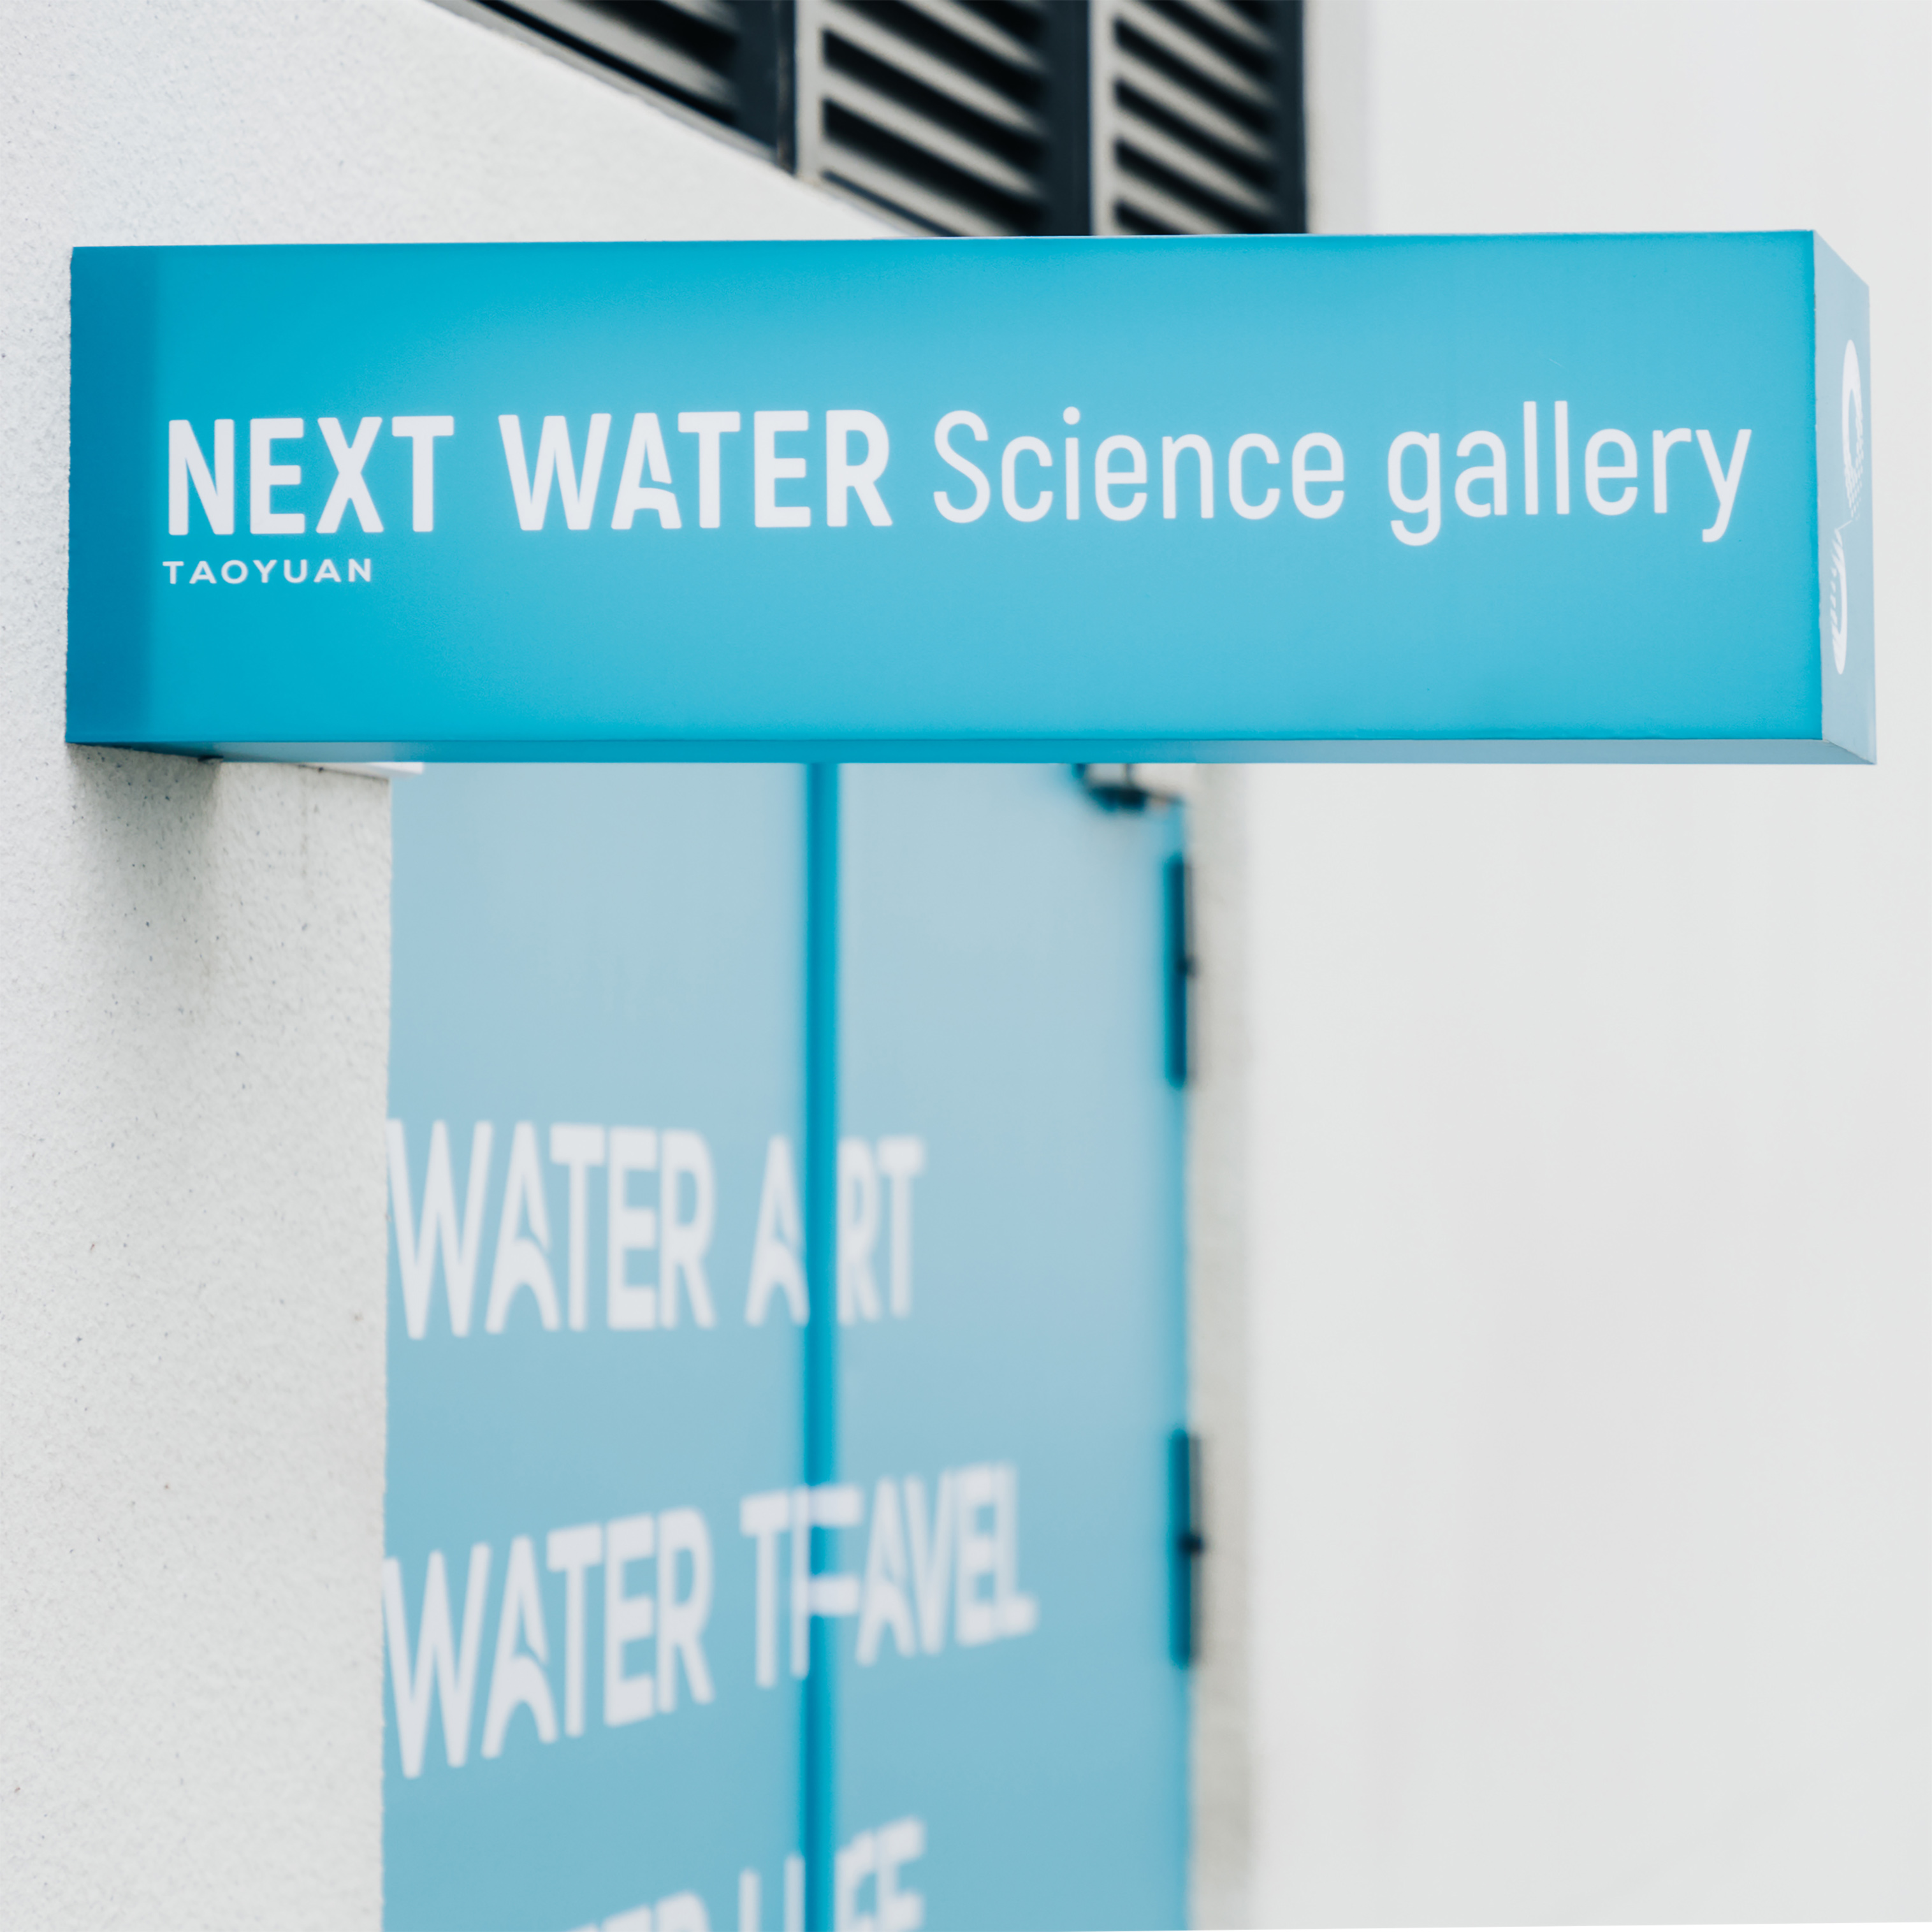 NEXT WATER science gallery